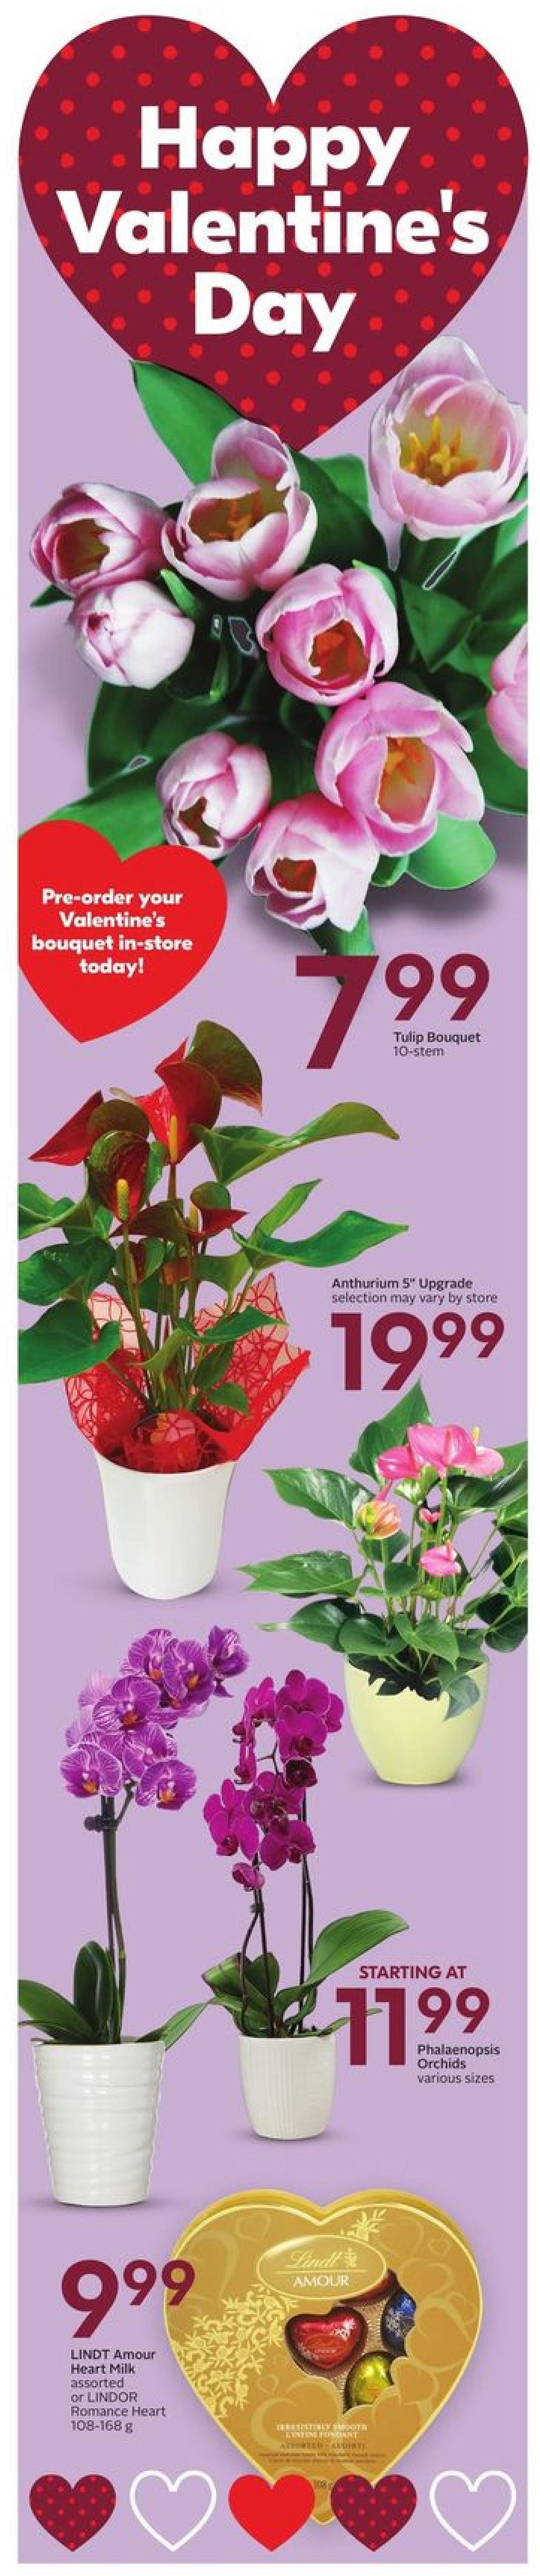 Safeway Flyer from February 6